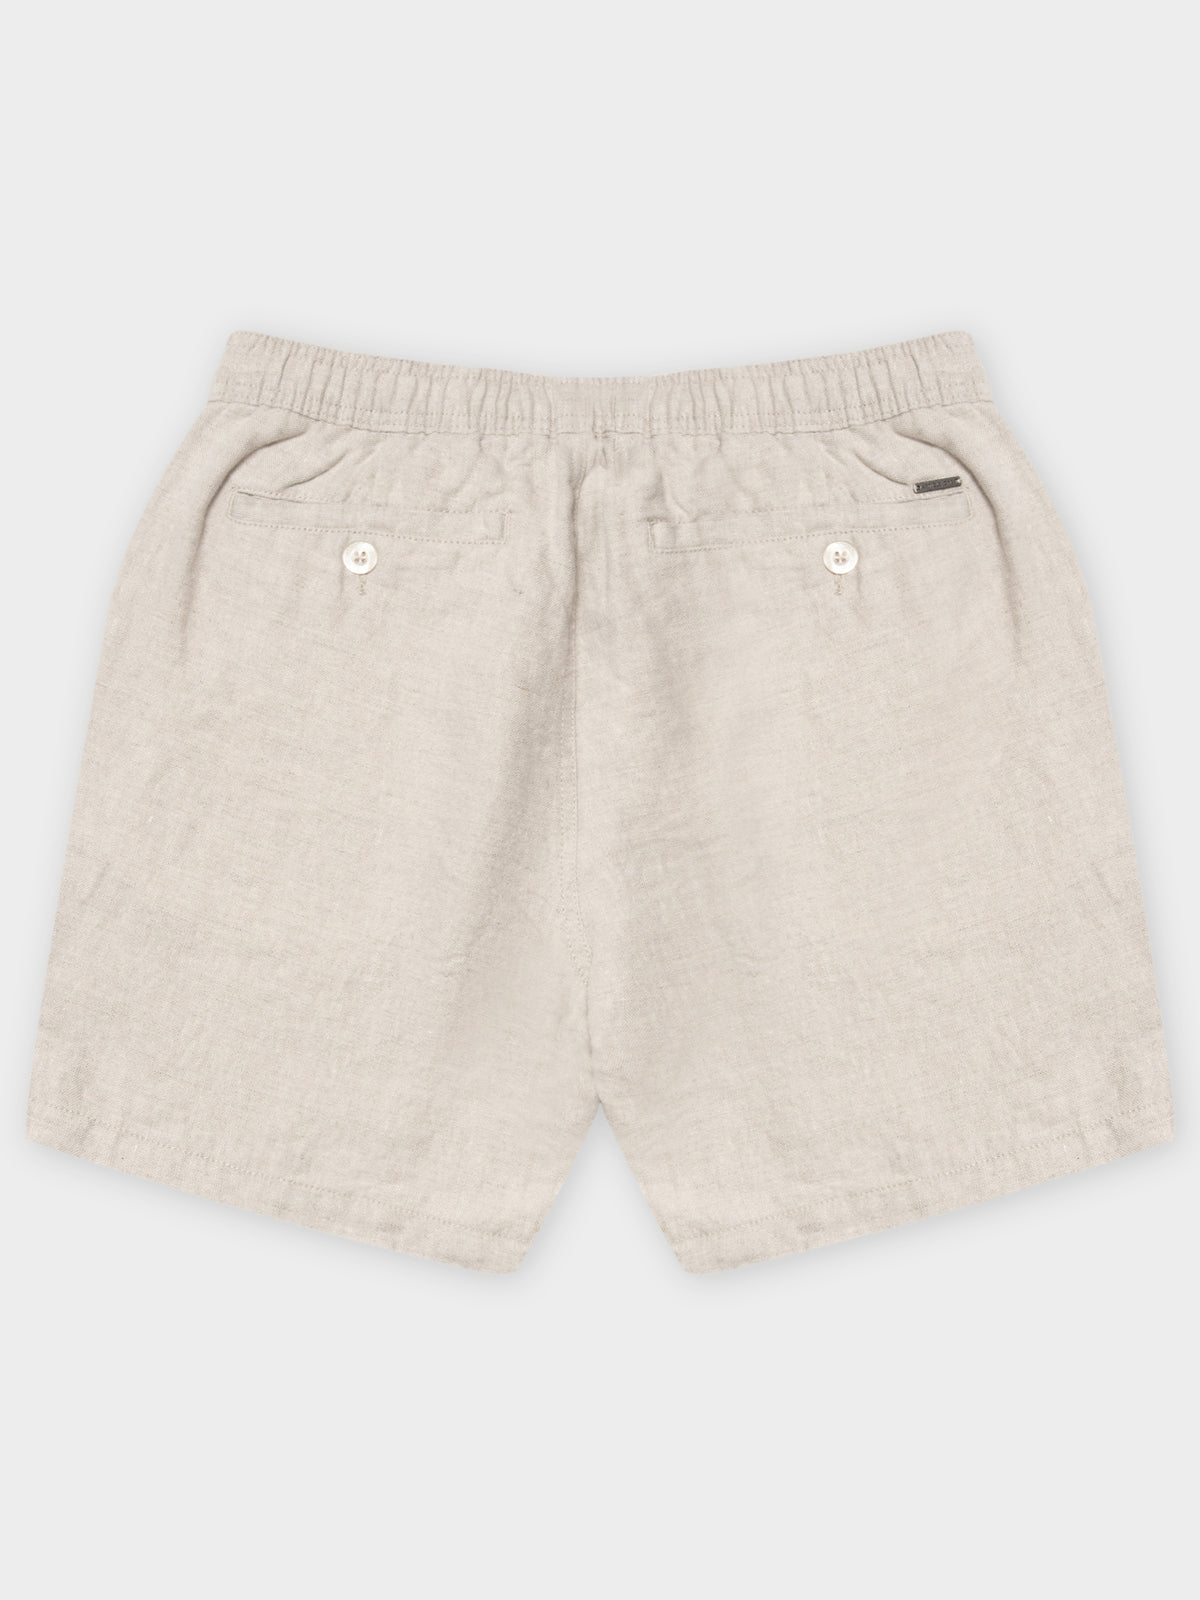 Nero Linen Shorts in Natural Marle